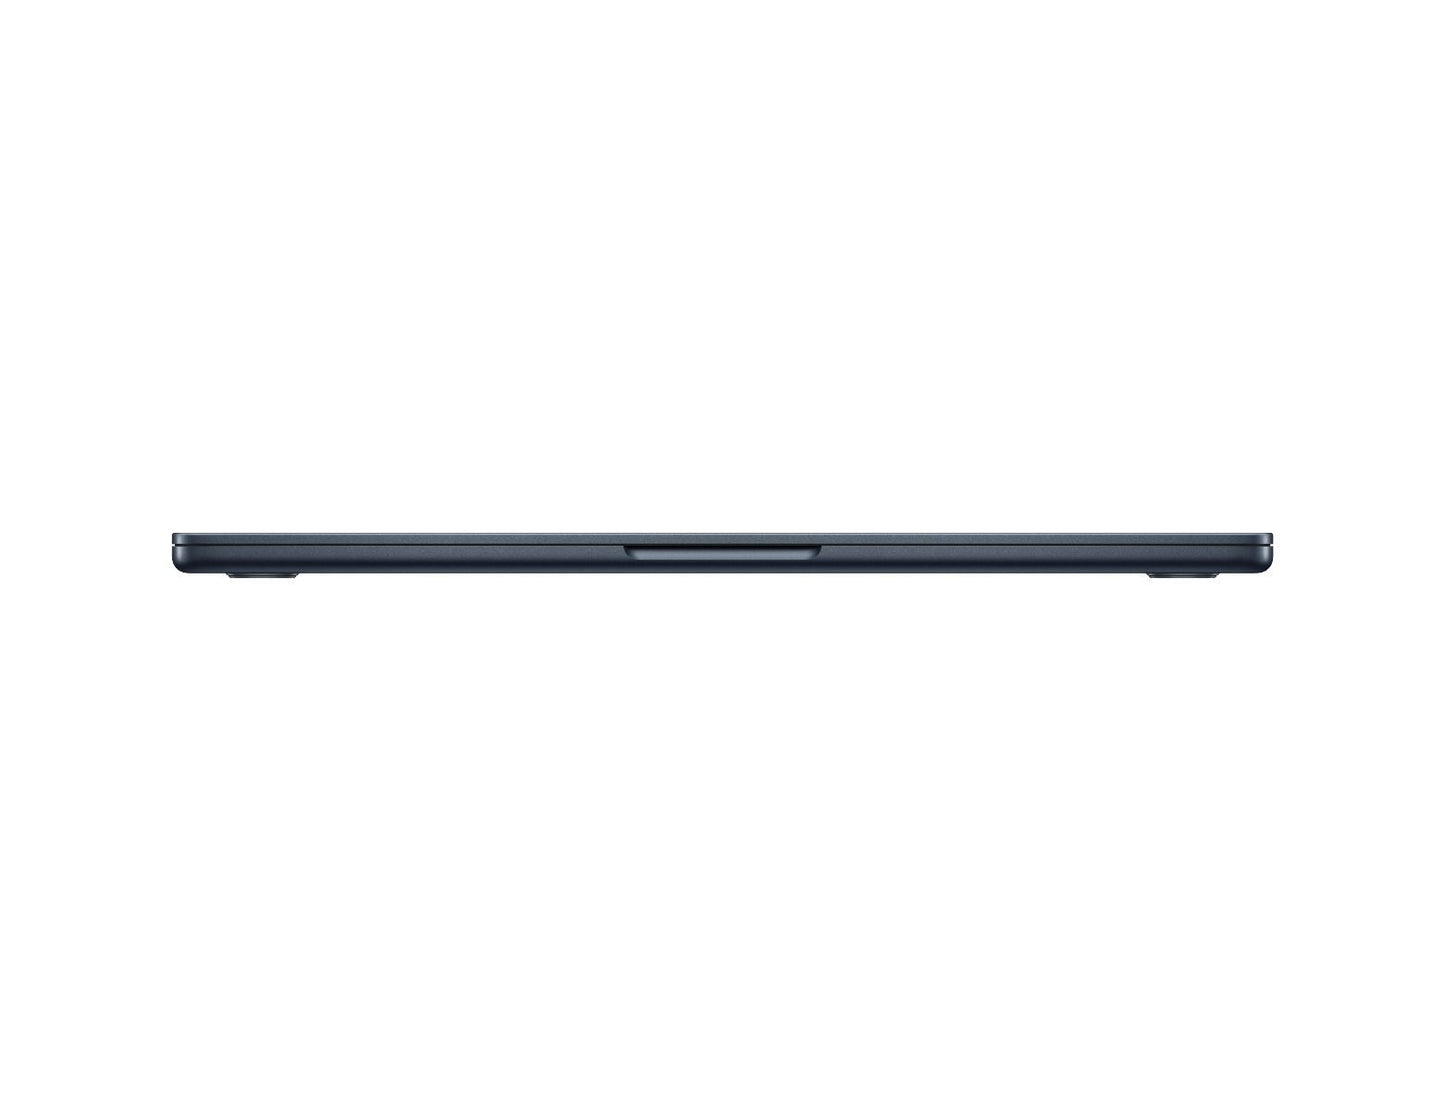 13-inch MacBook Air: Apple M2 chip with 8_core CPU and 10_core GPU, 16GB unified memory - 512GB SSD - 67W Adapter - Midnight